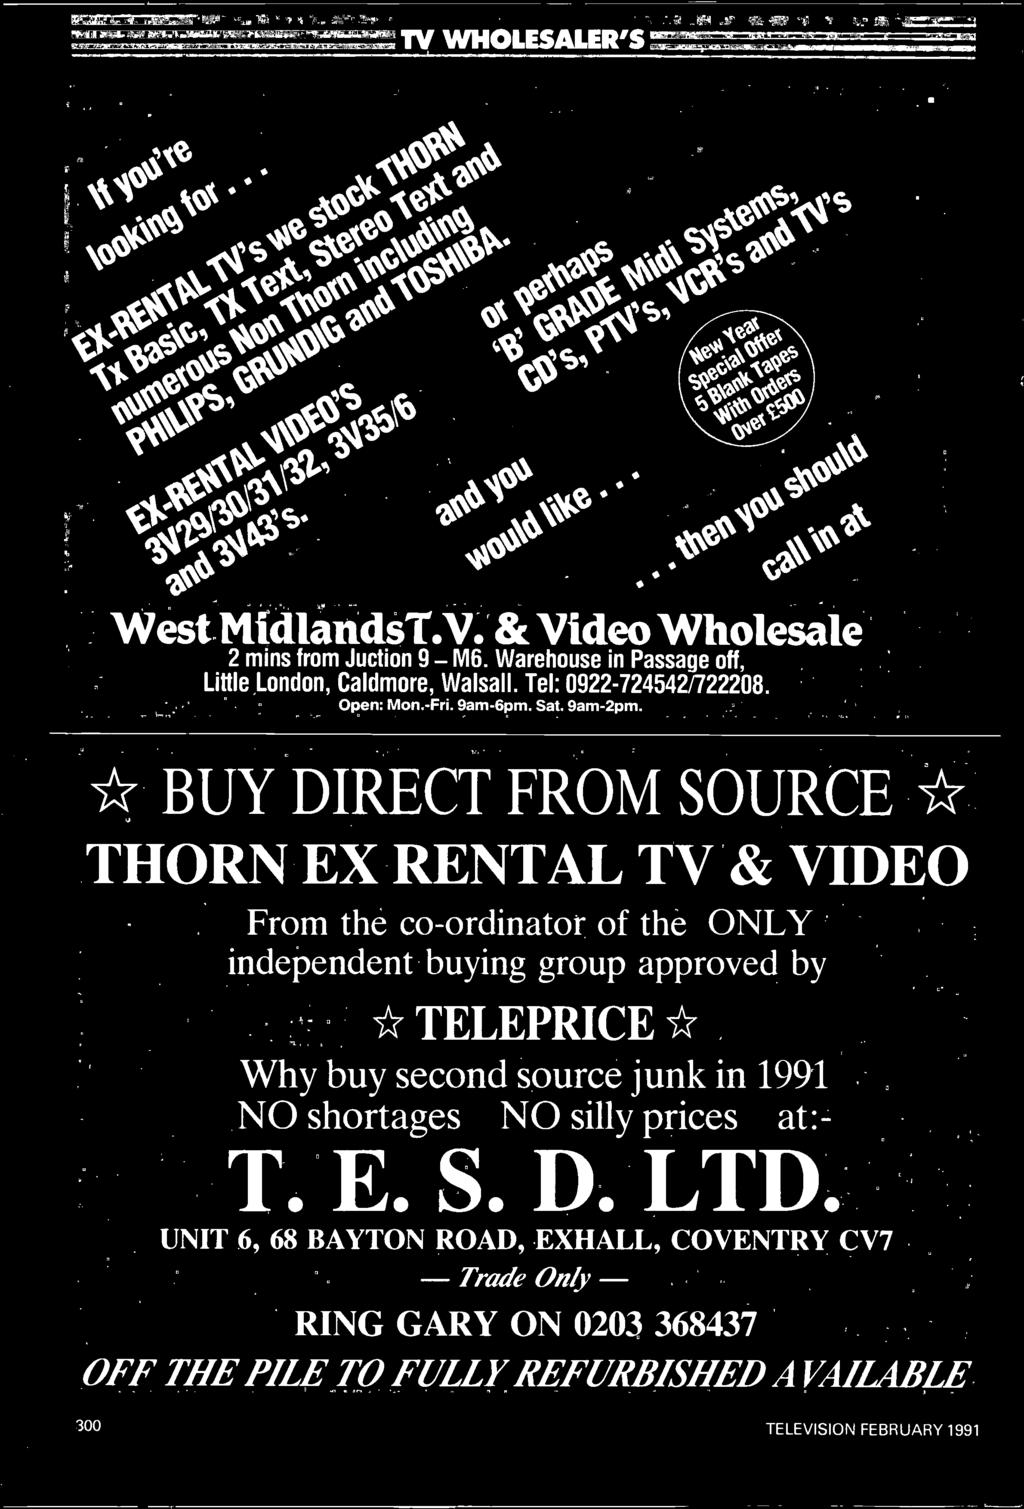 *TELEPRICE* Why buy second source junk in 1991 NO shortages NO silly prices at: - T E S D LTD UNIT 6, 68 BAYTON ROAD,